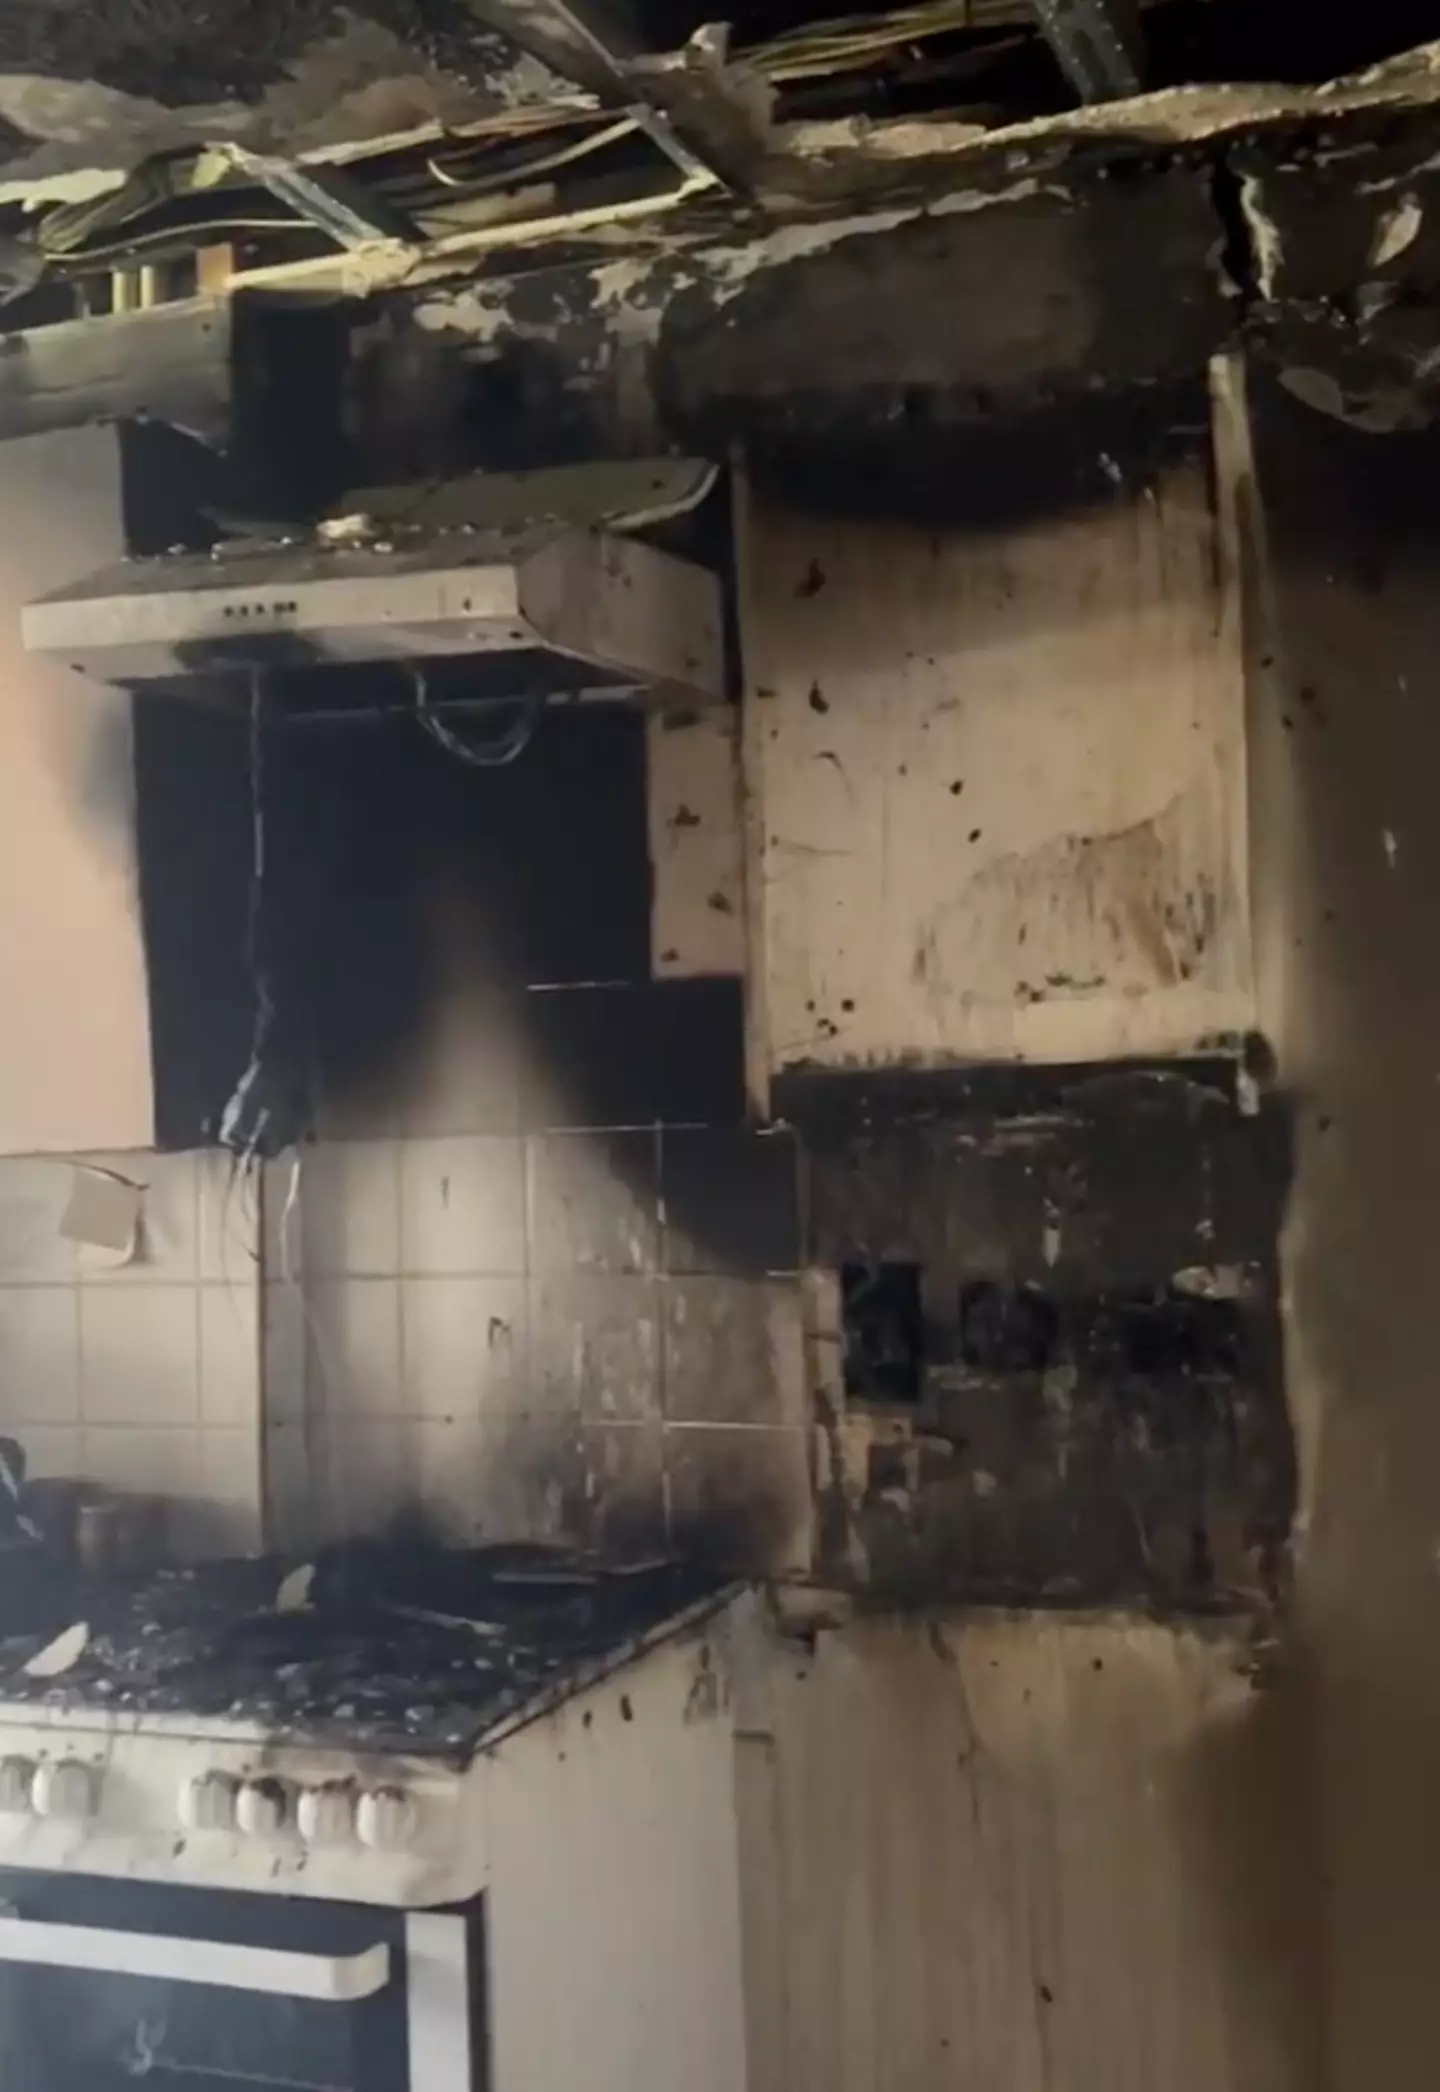 The kitchen was left black and burned by the fire.